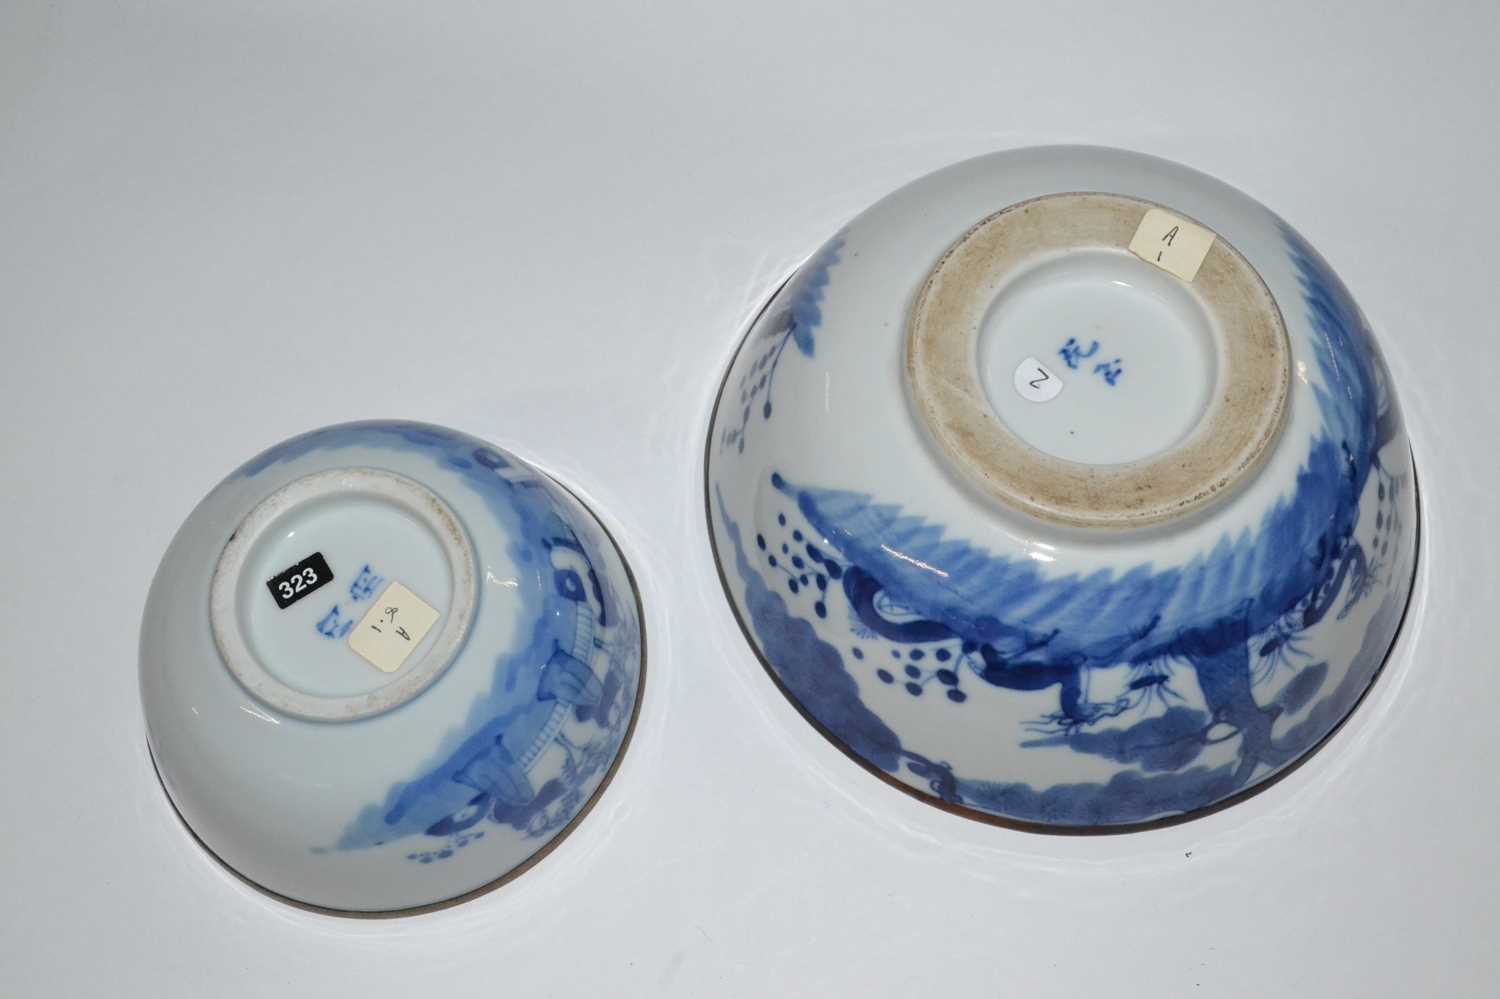 An Oriental porcelain bowl, possibly Japanese, with blue and white design and metal rim together - Image 3 of 3